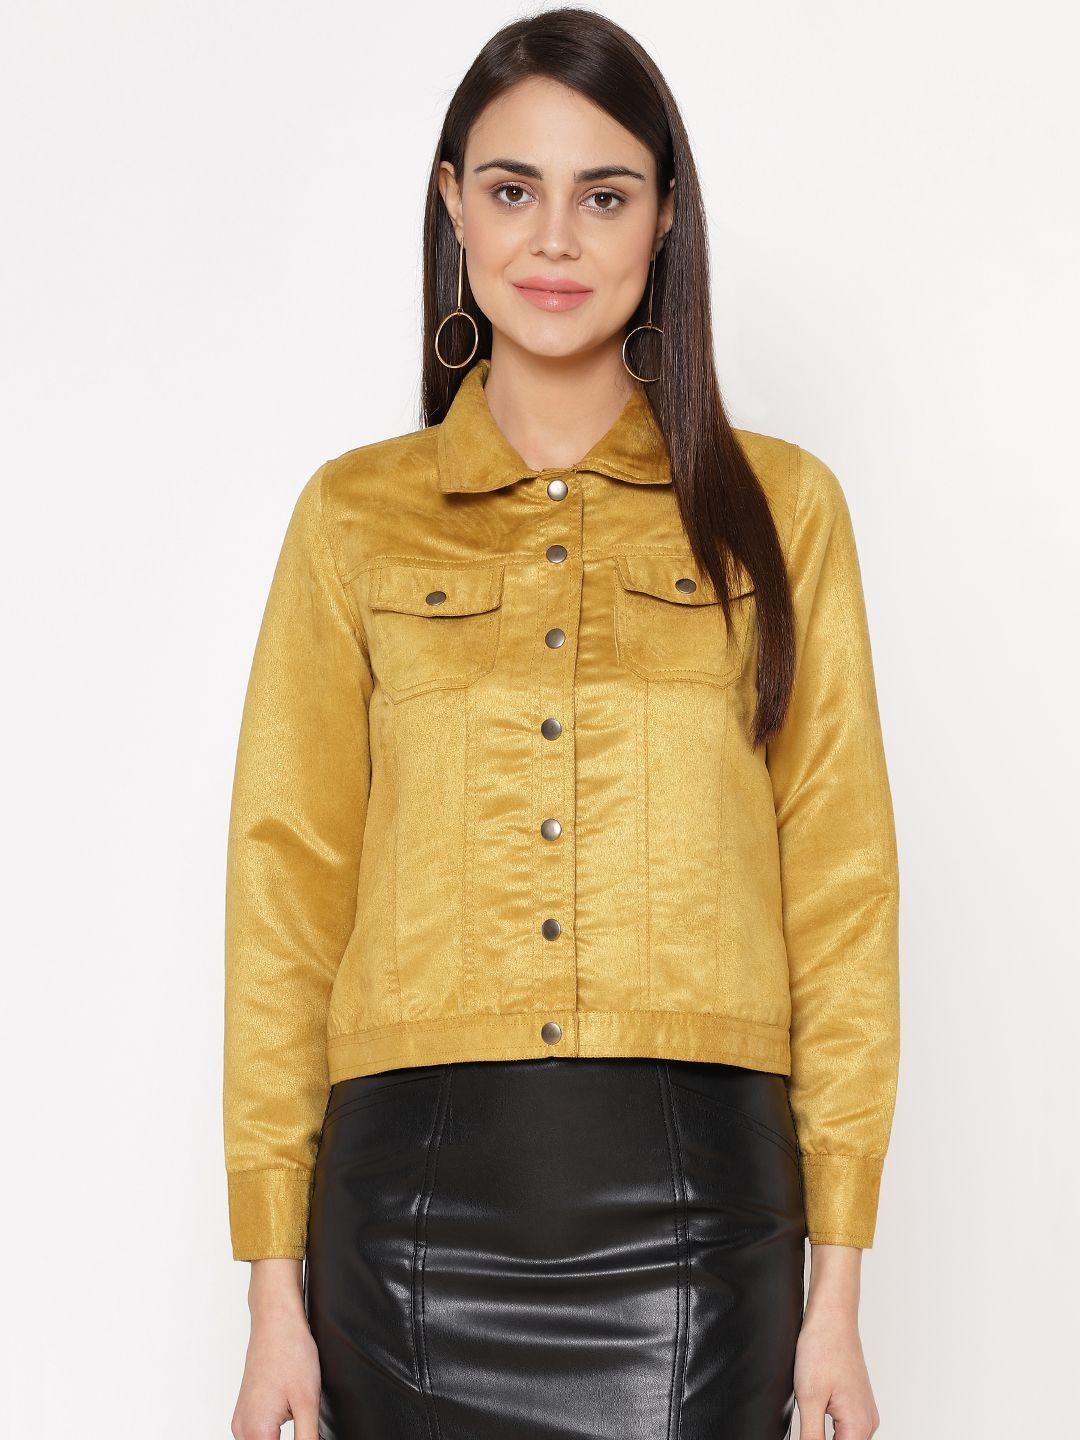 carlton-london-women-mustard-yellow-solid-tailored-jacket-with-suede-finish